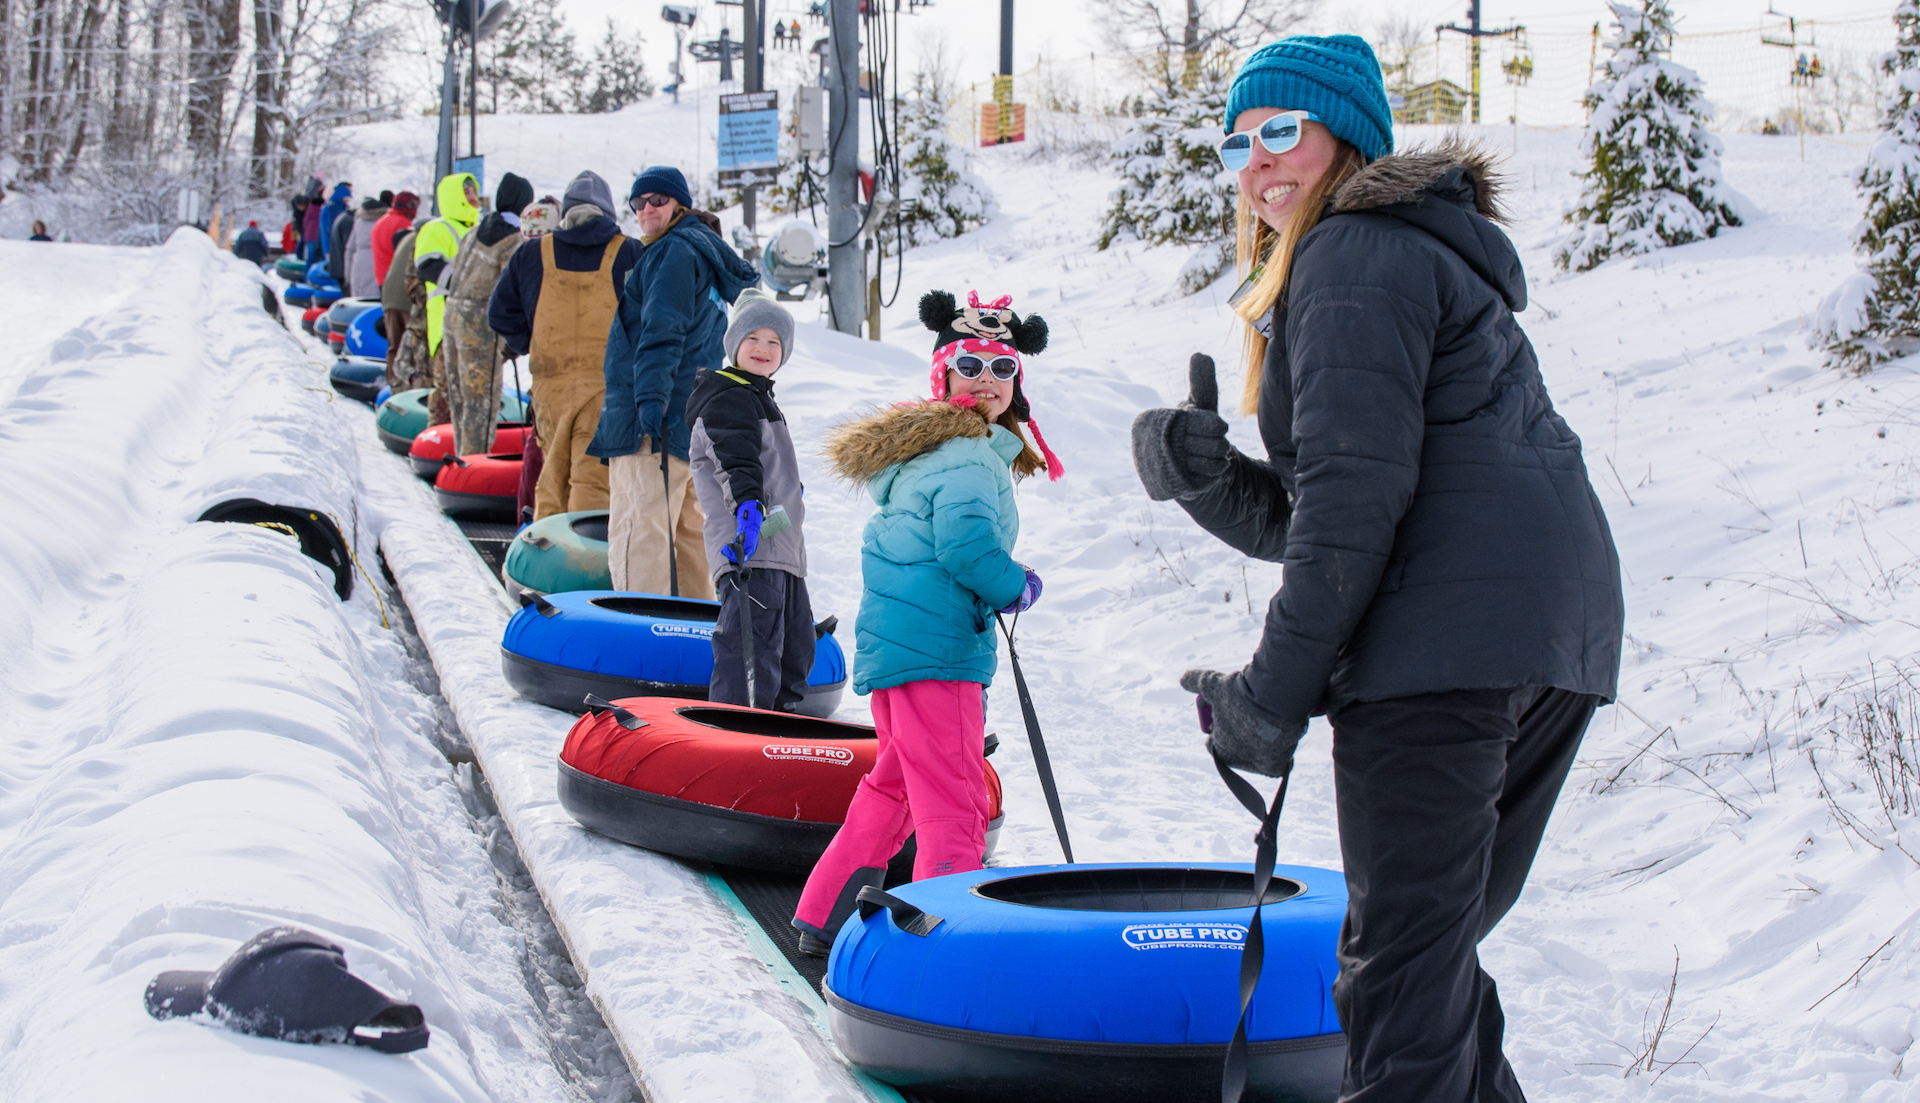 Tubing Tickets Now Available For Advanced Reservations